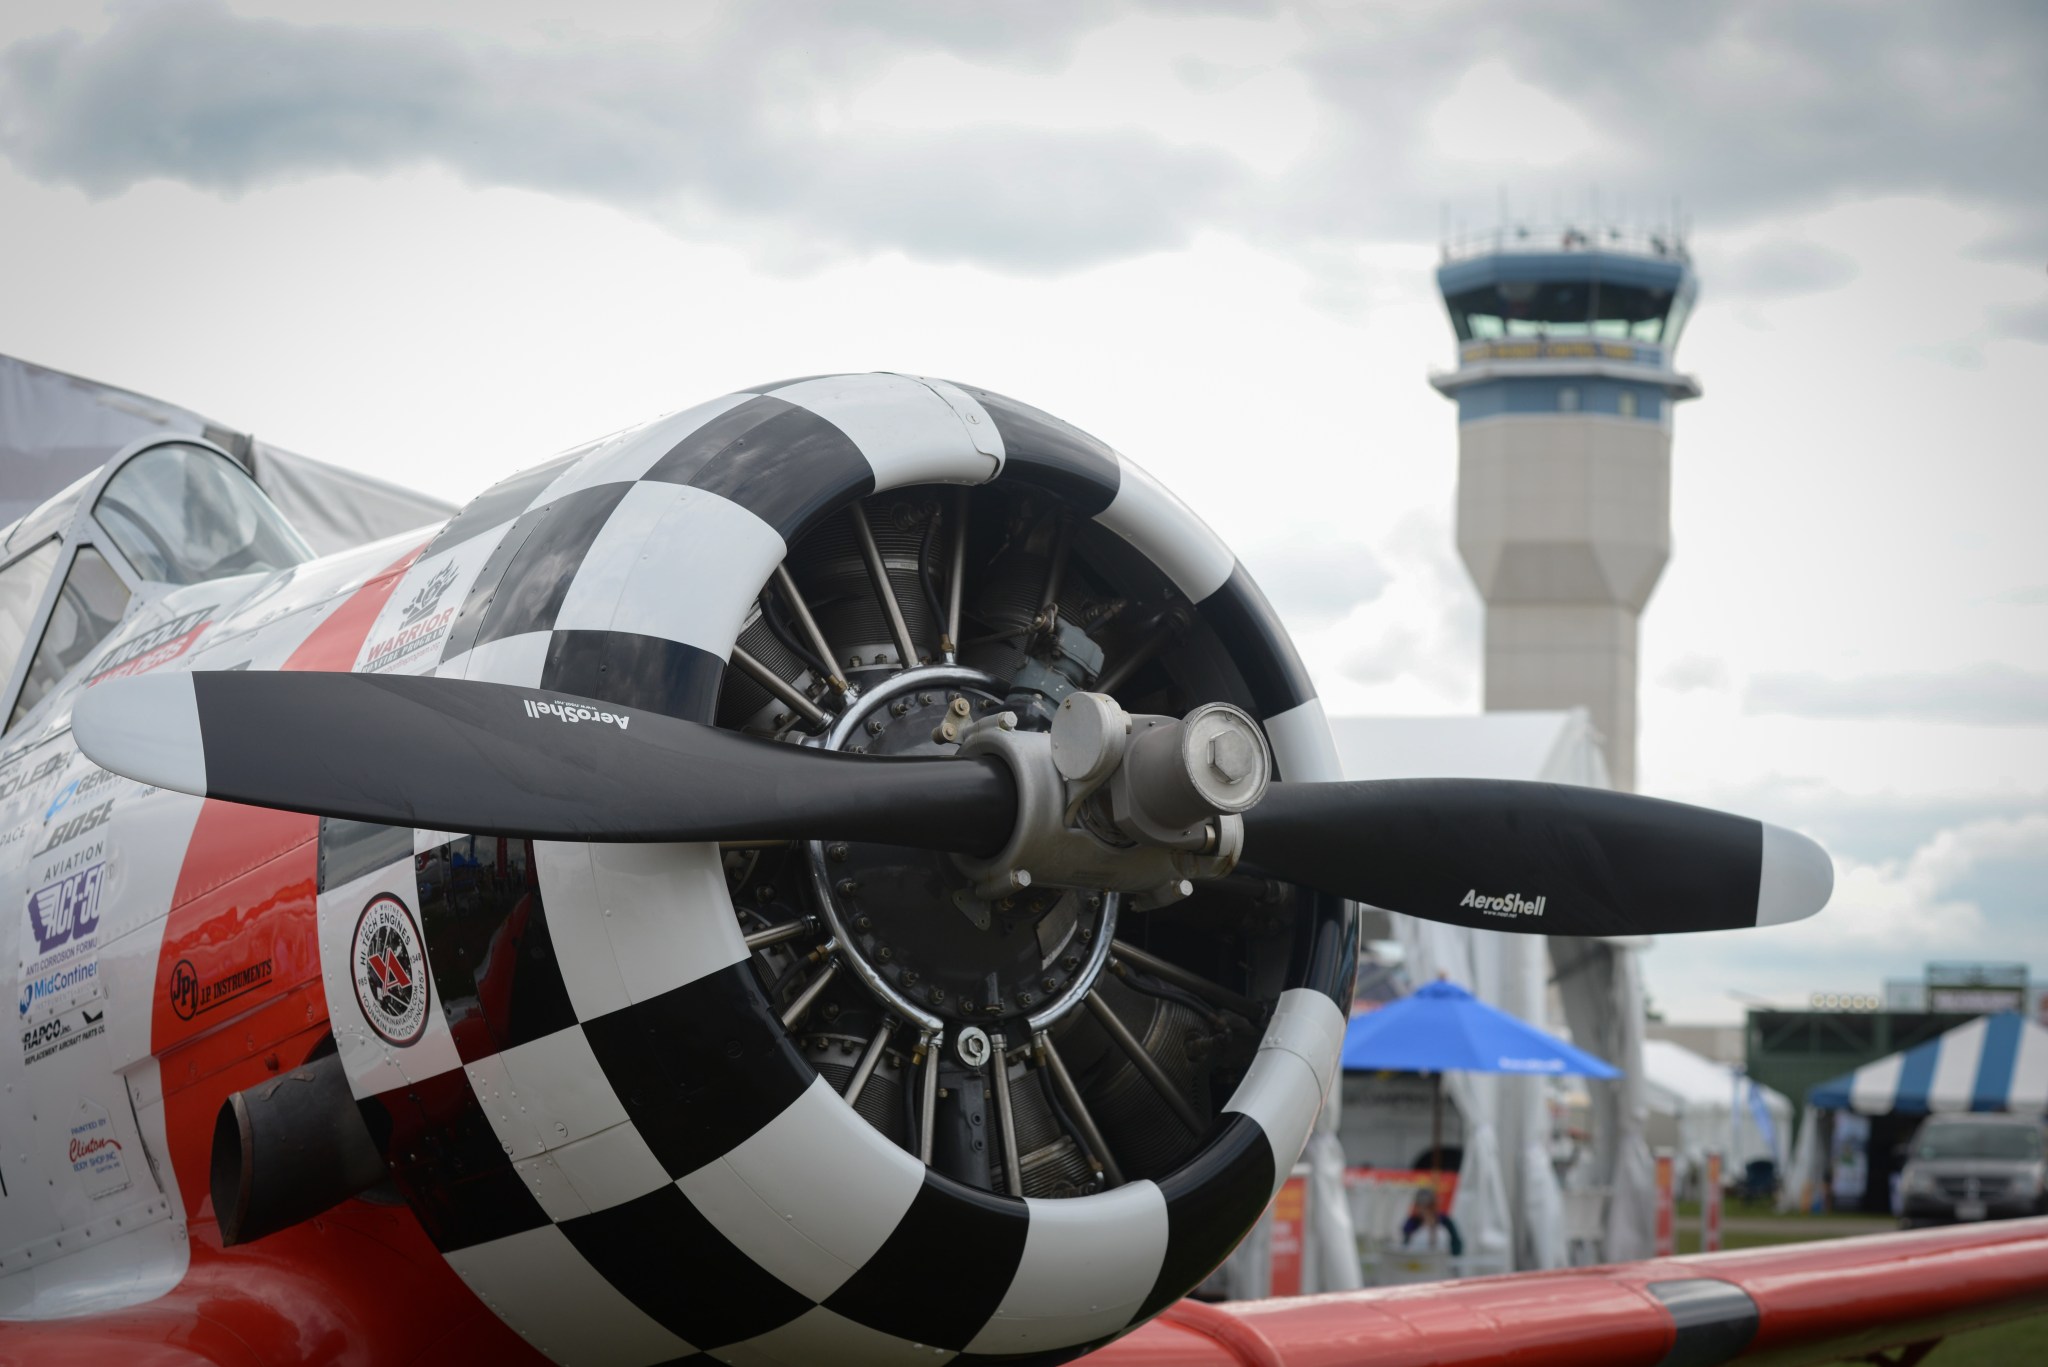 The business end of a North American AT-6 Texan aircraft sits with the Oshkosh air traffic control tower in the background.